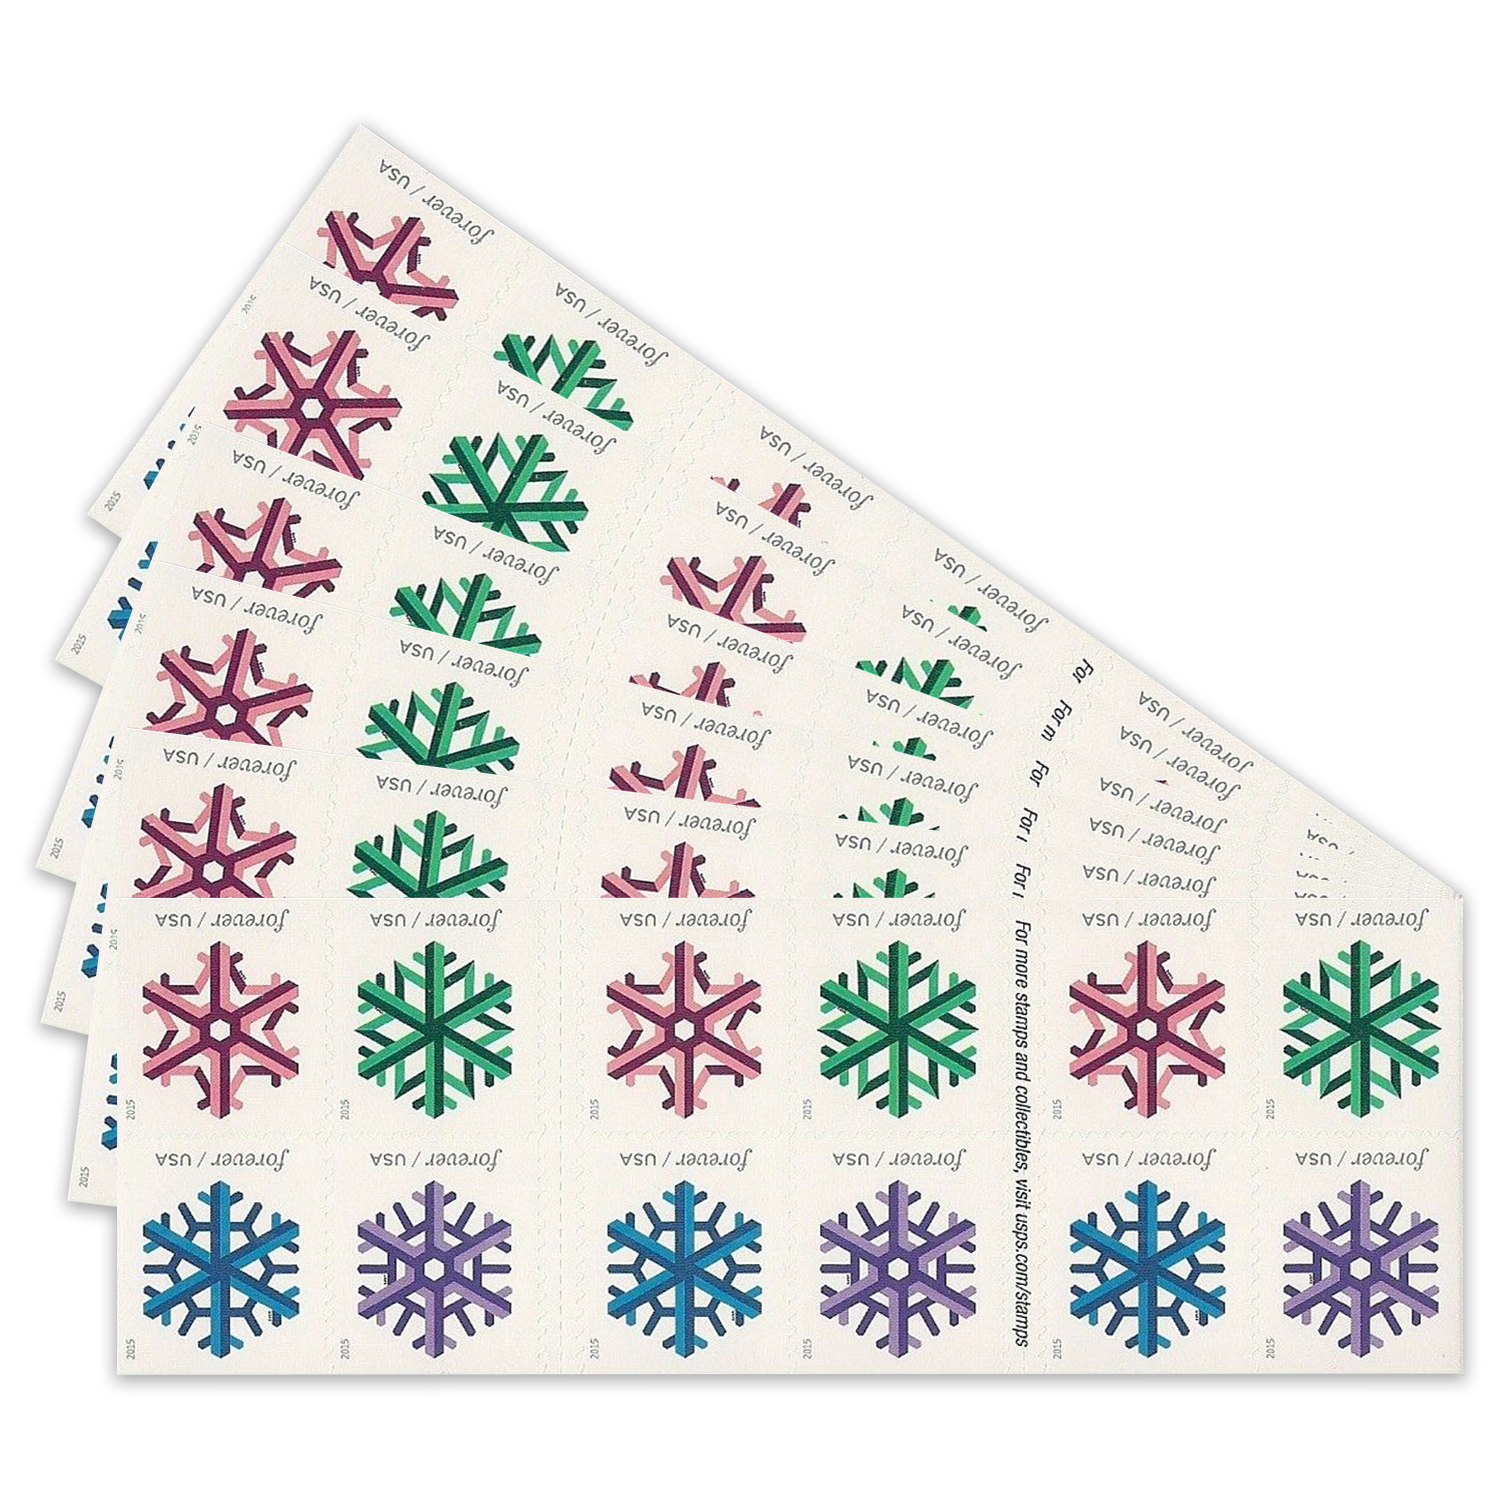 5031-34c - 2015 First-Class Forever Stamp - Imperforate Geometric Snowflakes